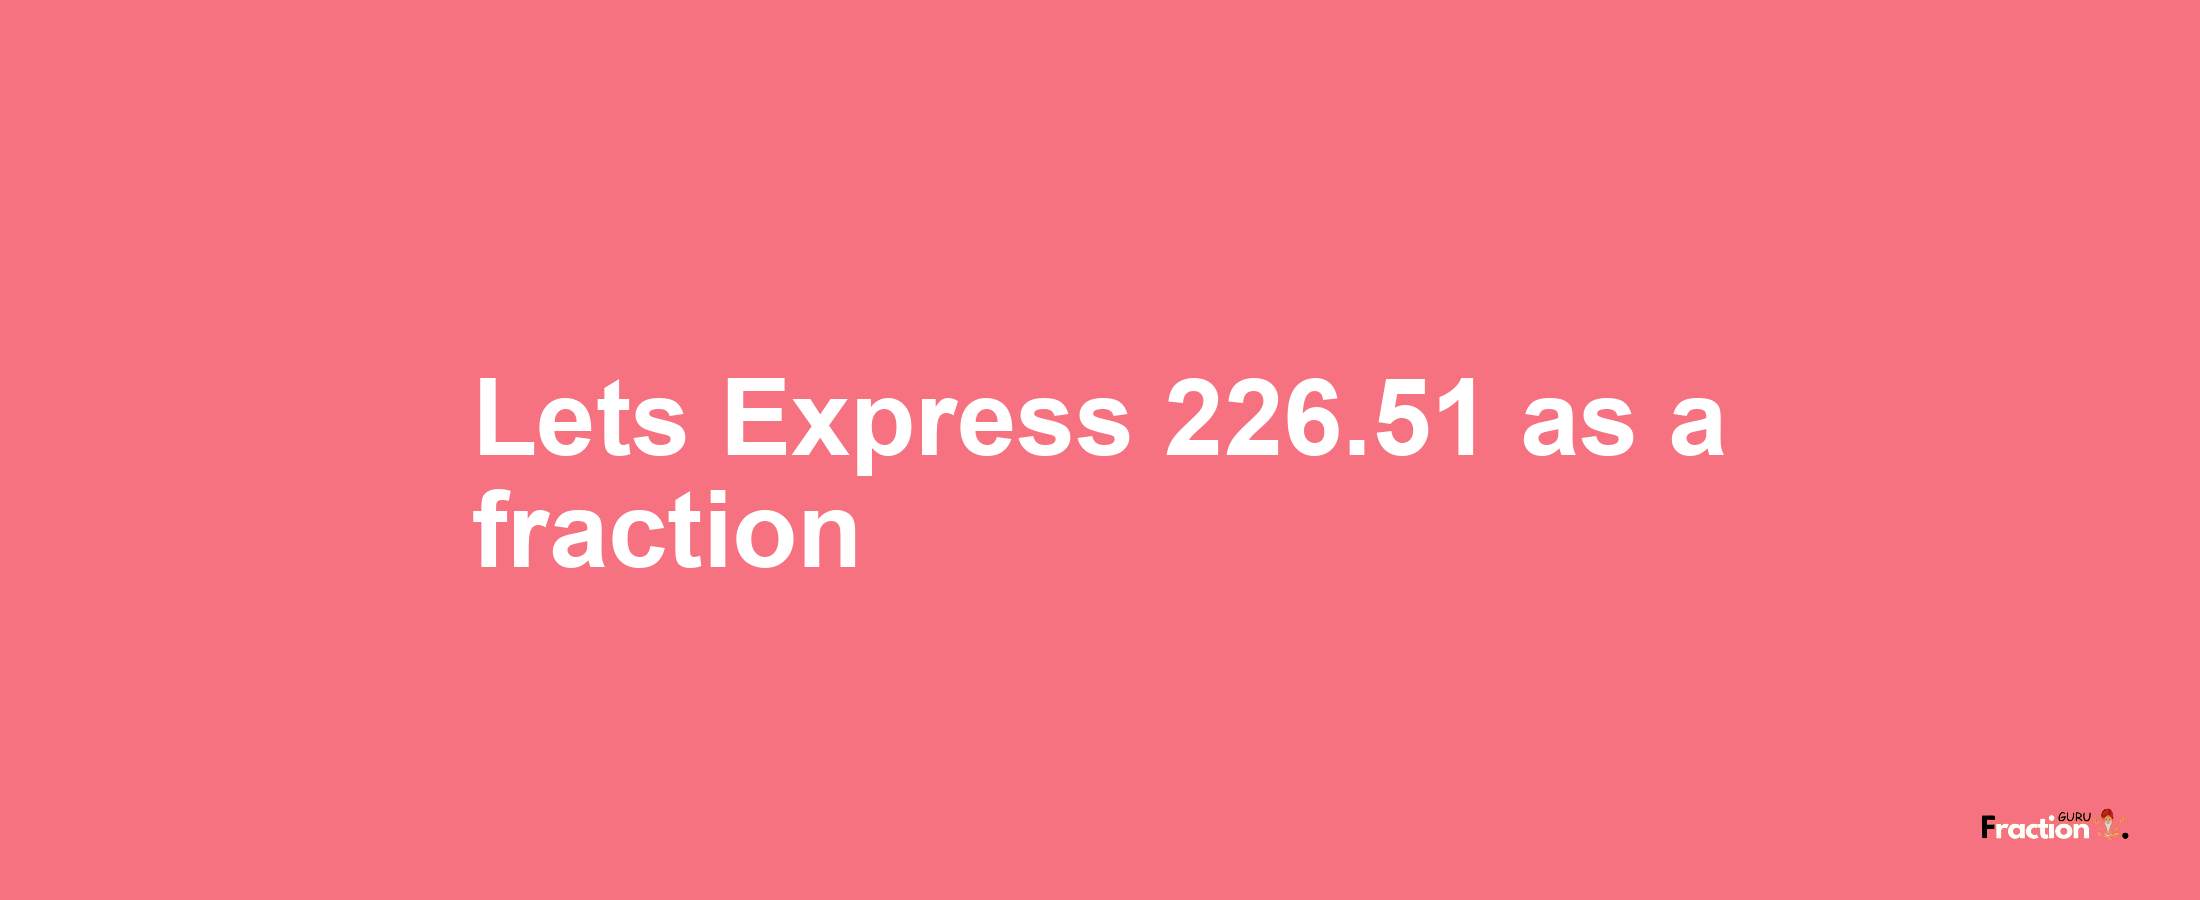 Lets Express 226.51 as afraction